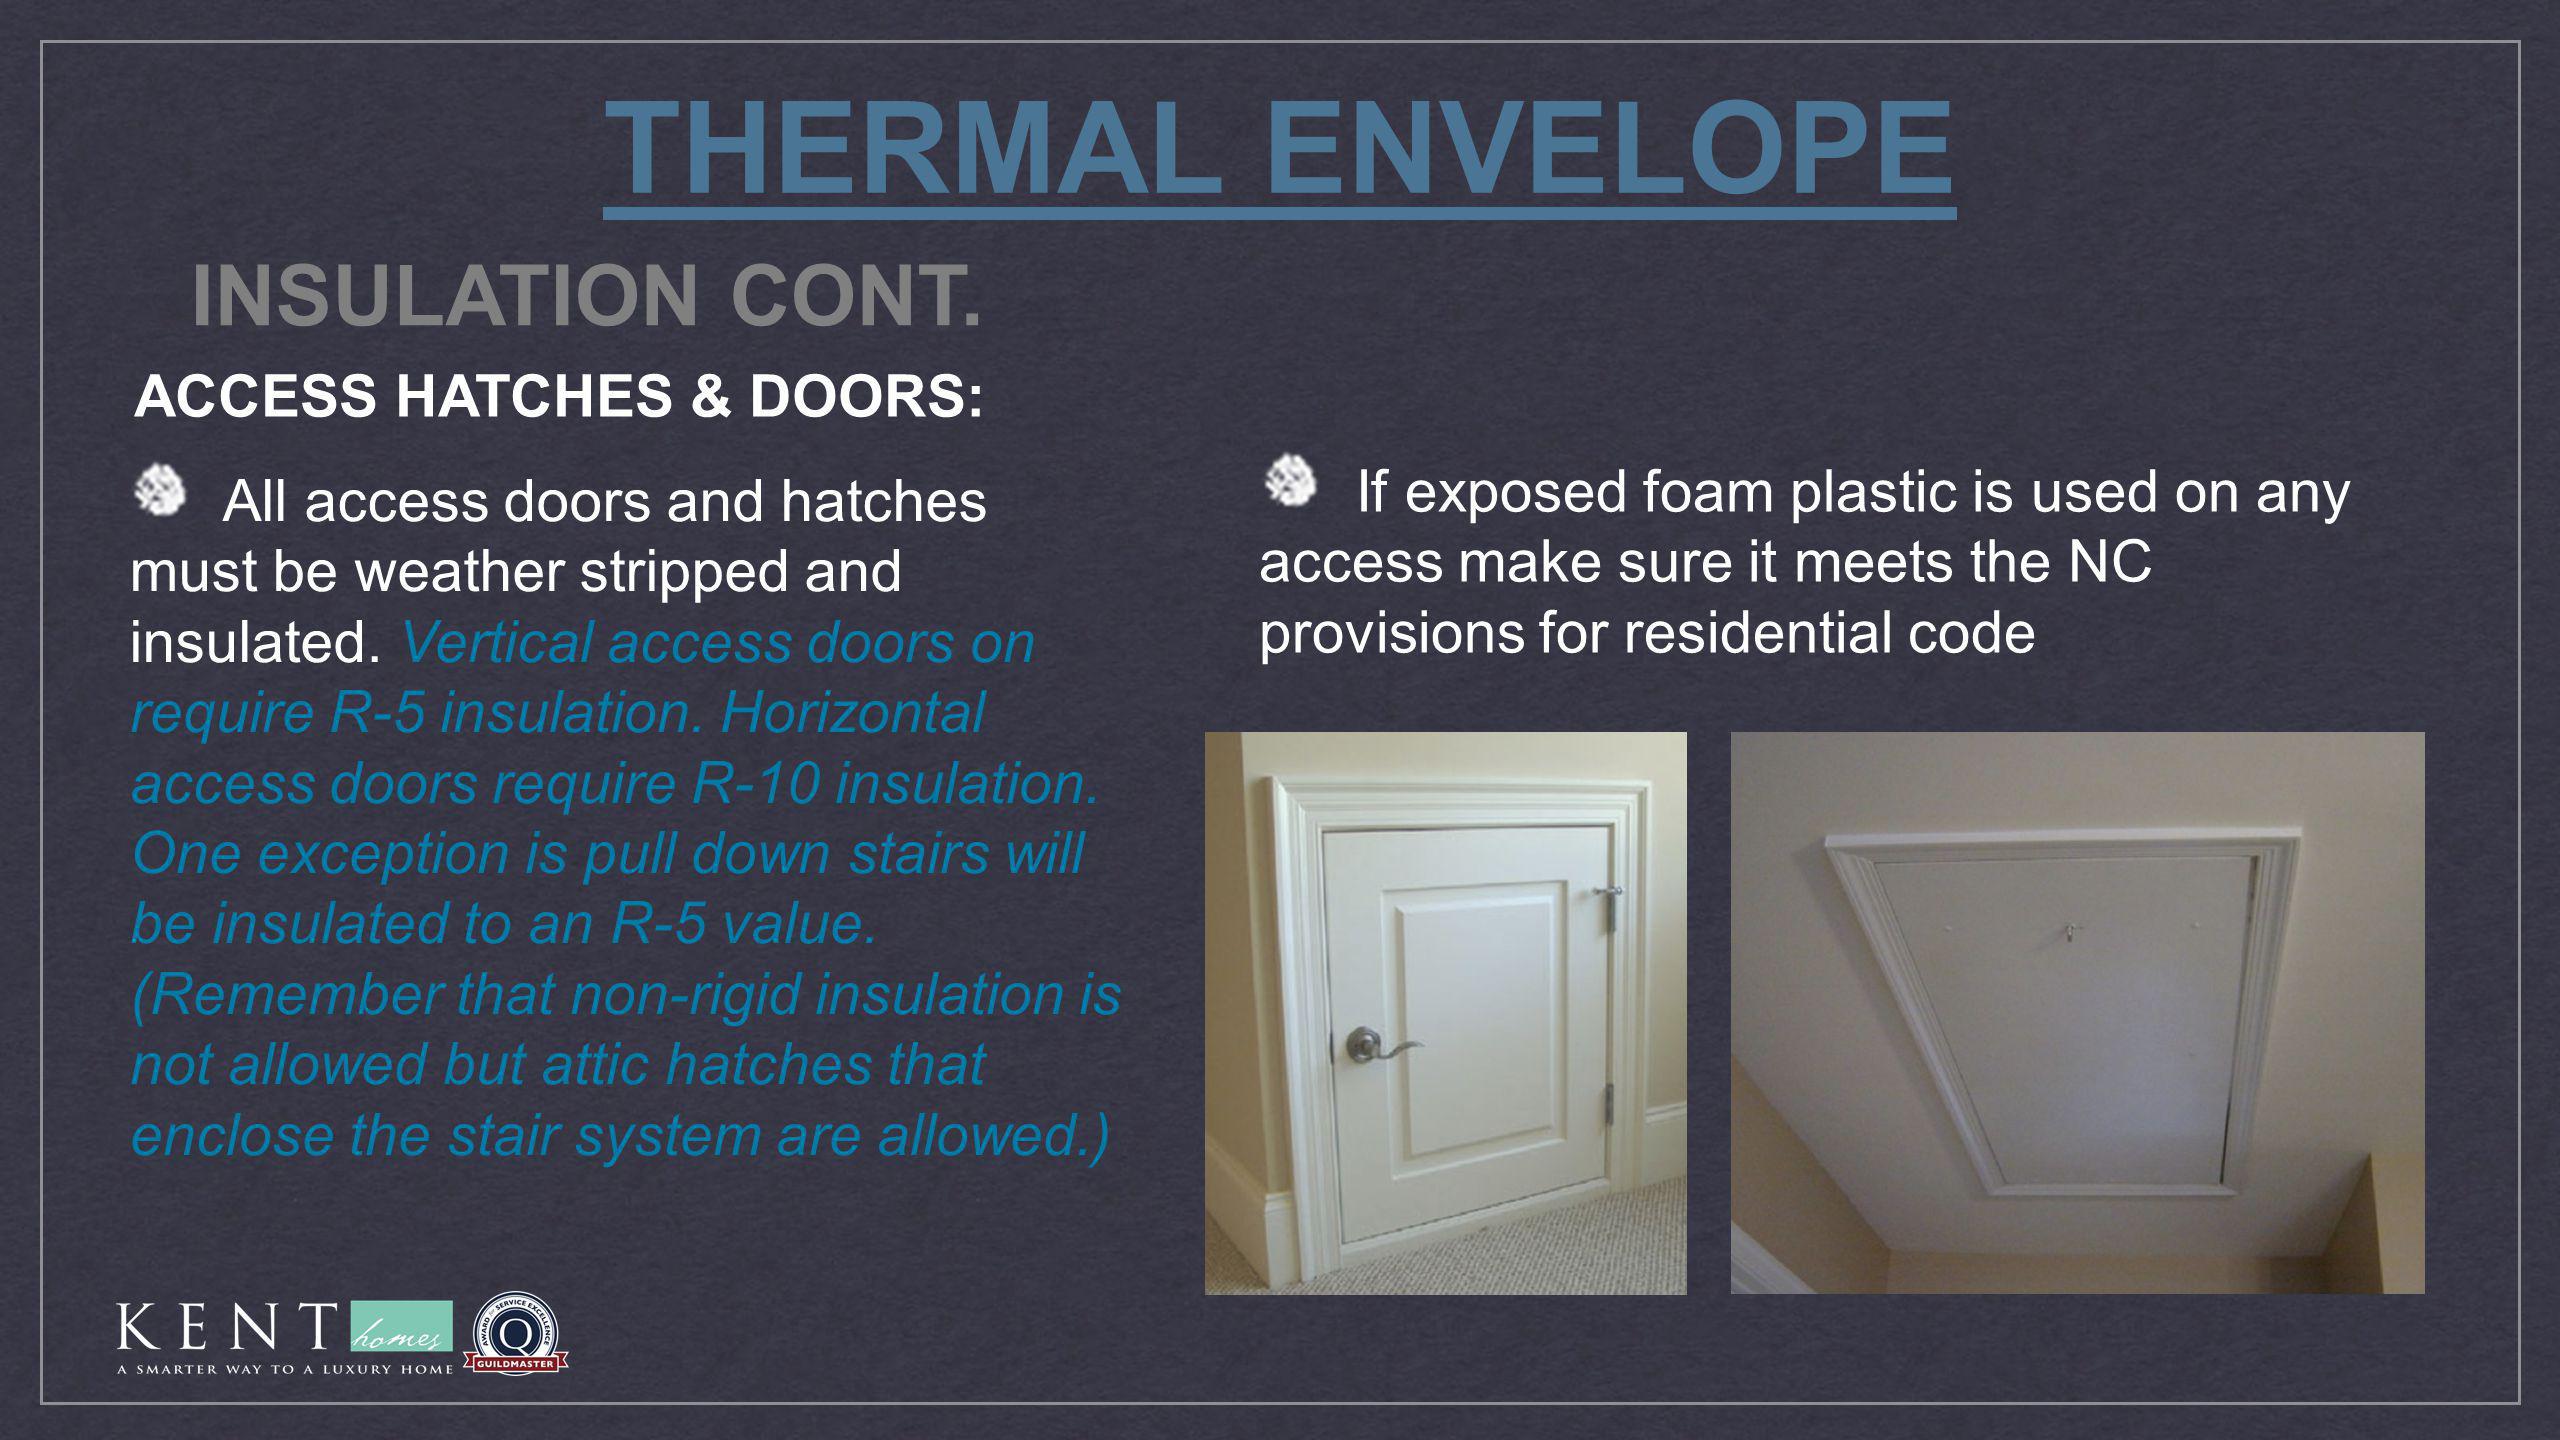 THERMAL ENVELOPE All access doors and hatches must be weather stripped and insulated.